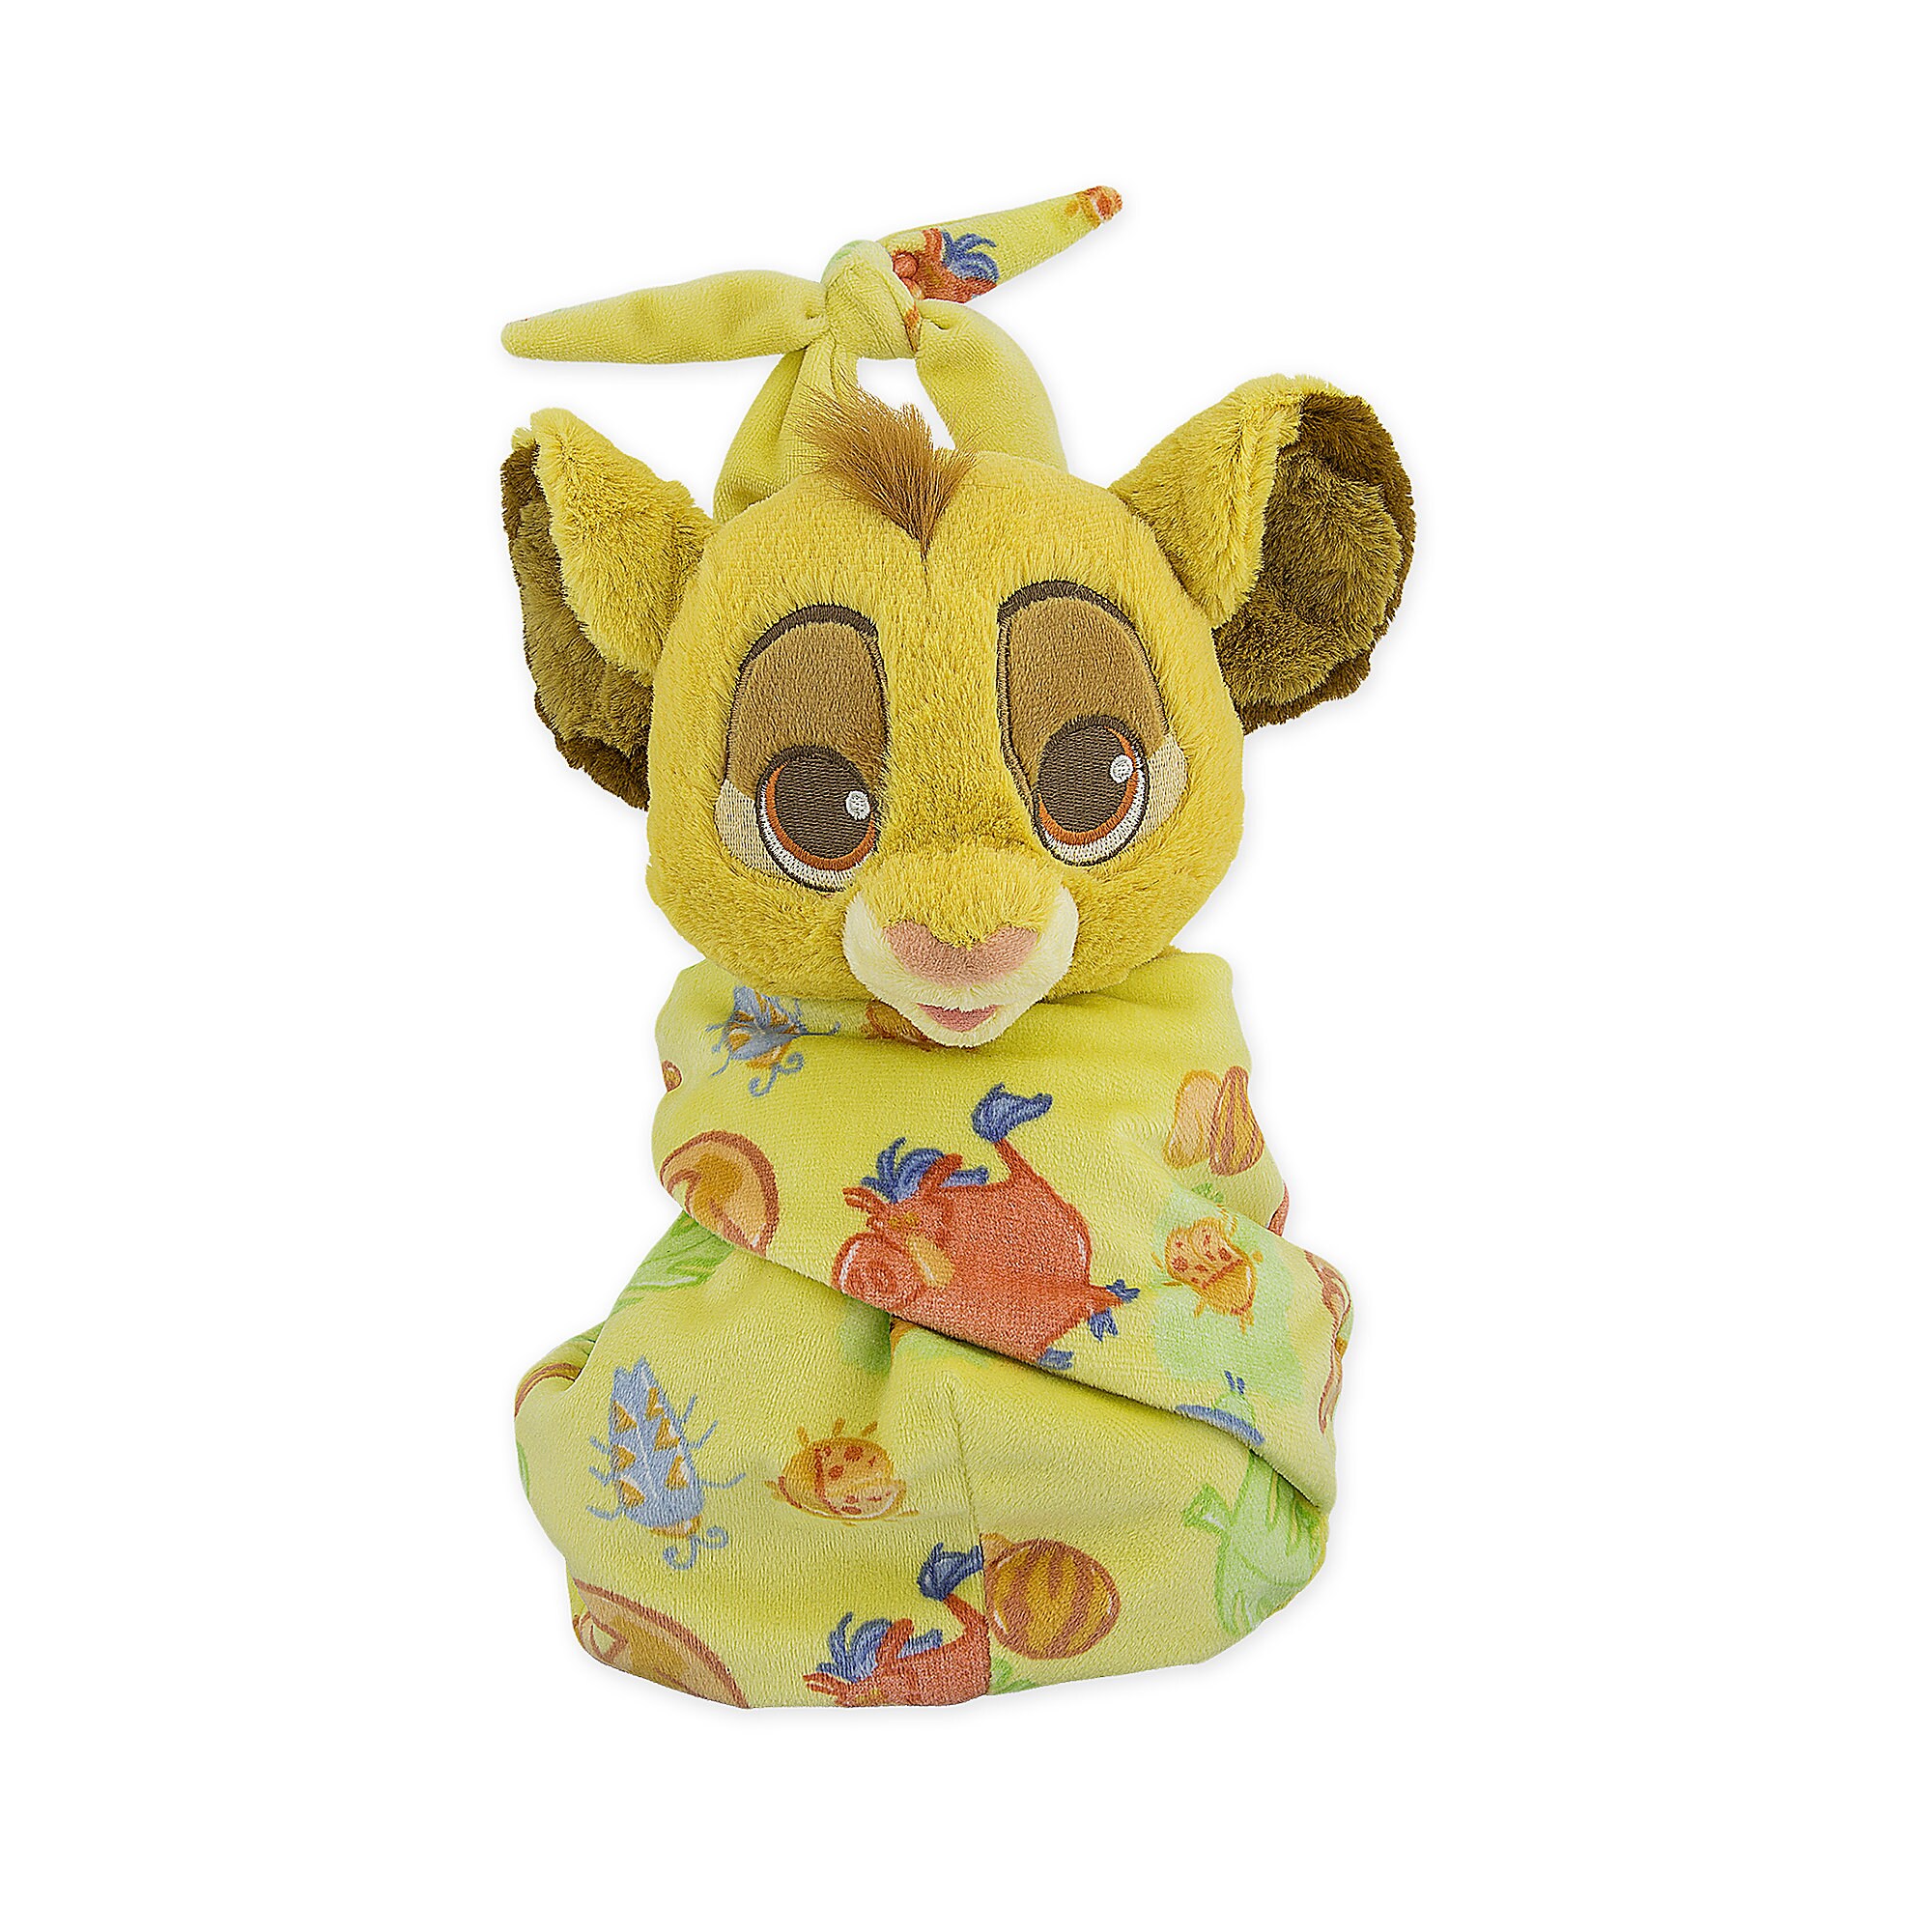 Simba Plush in Pouch - Disney Babies - Small